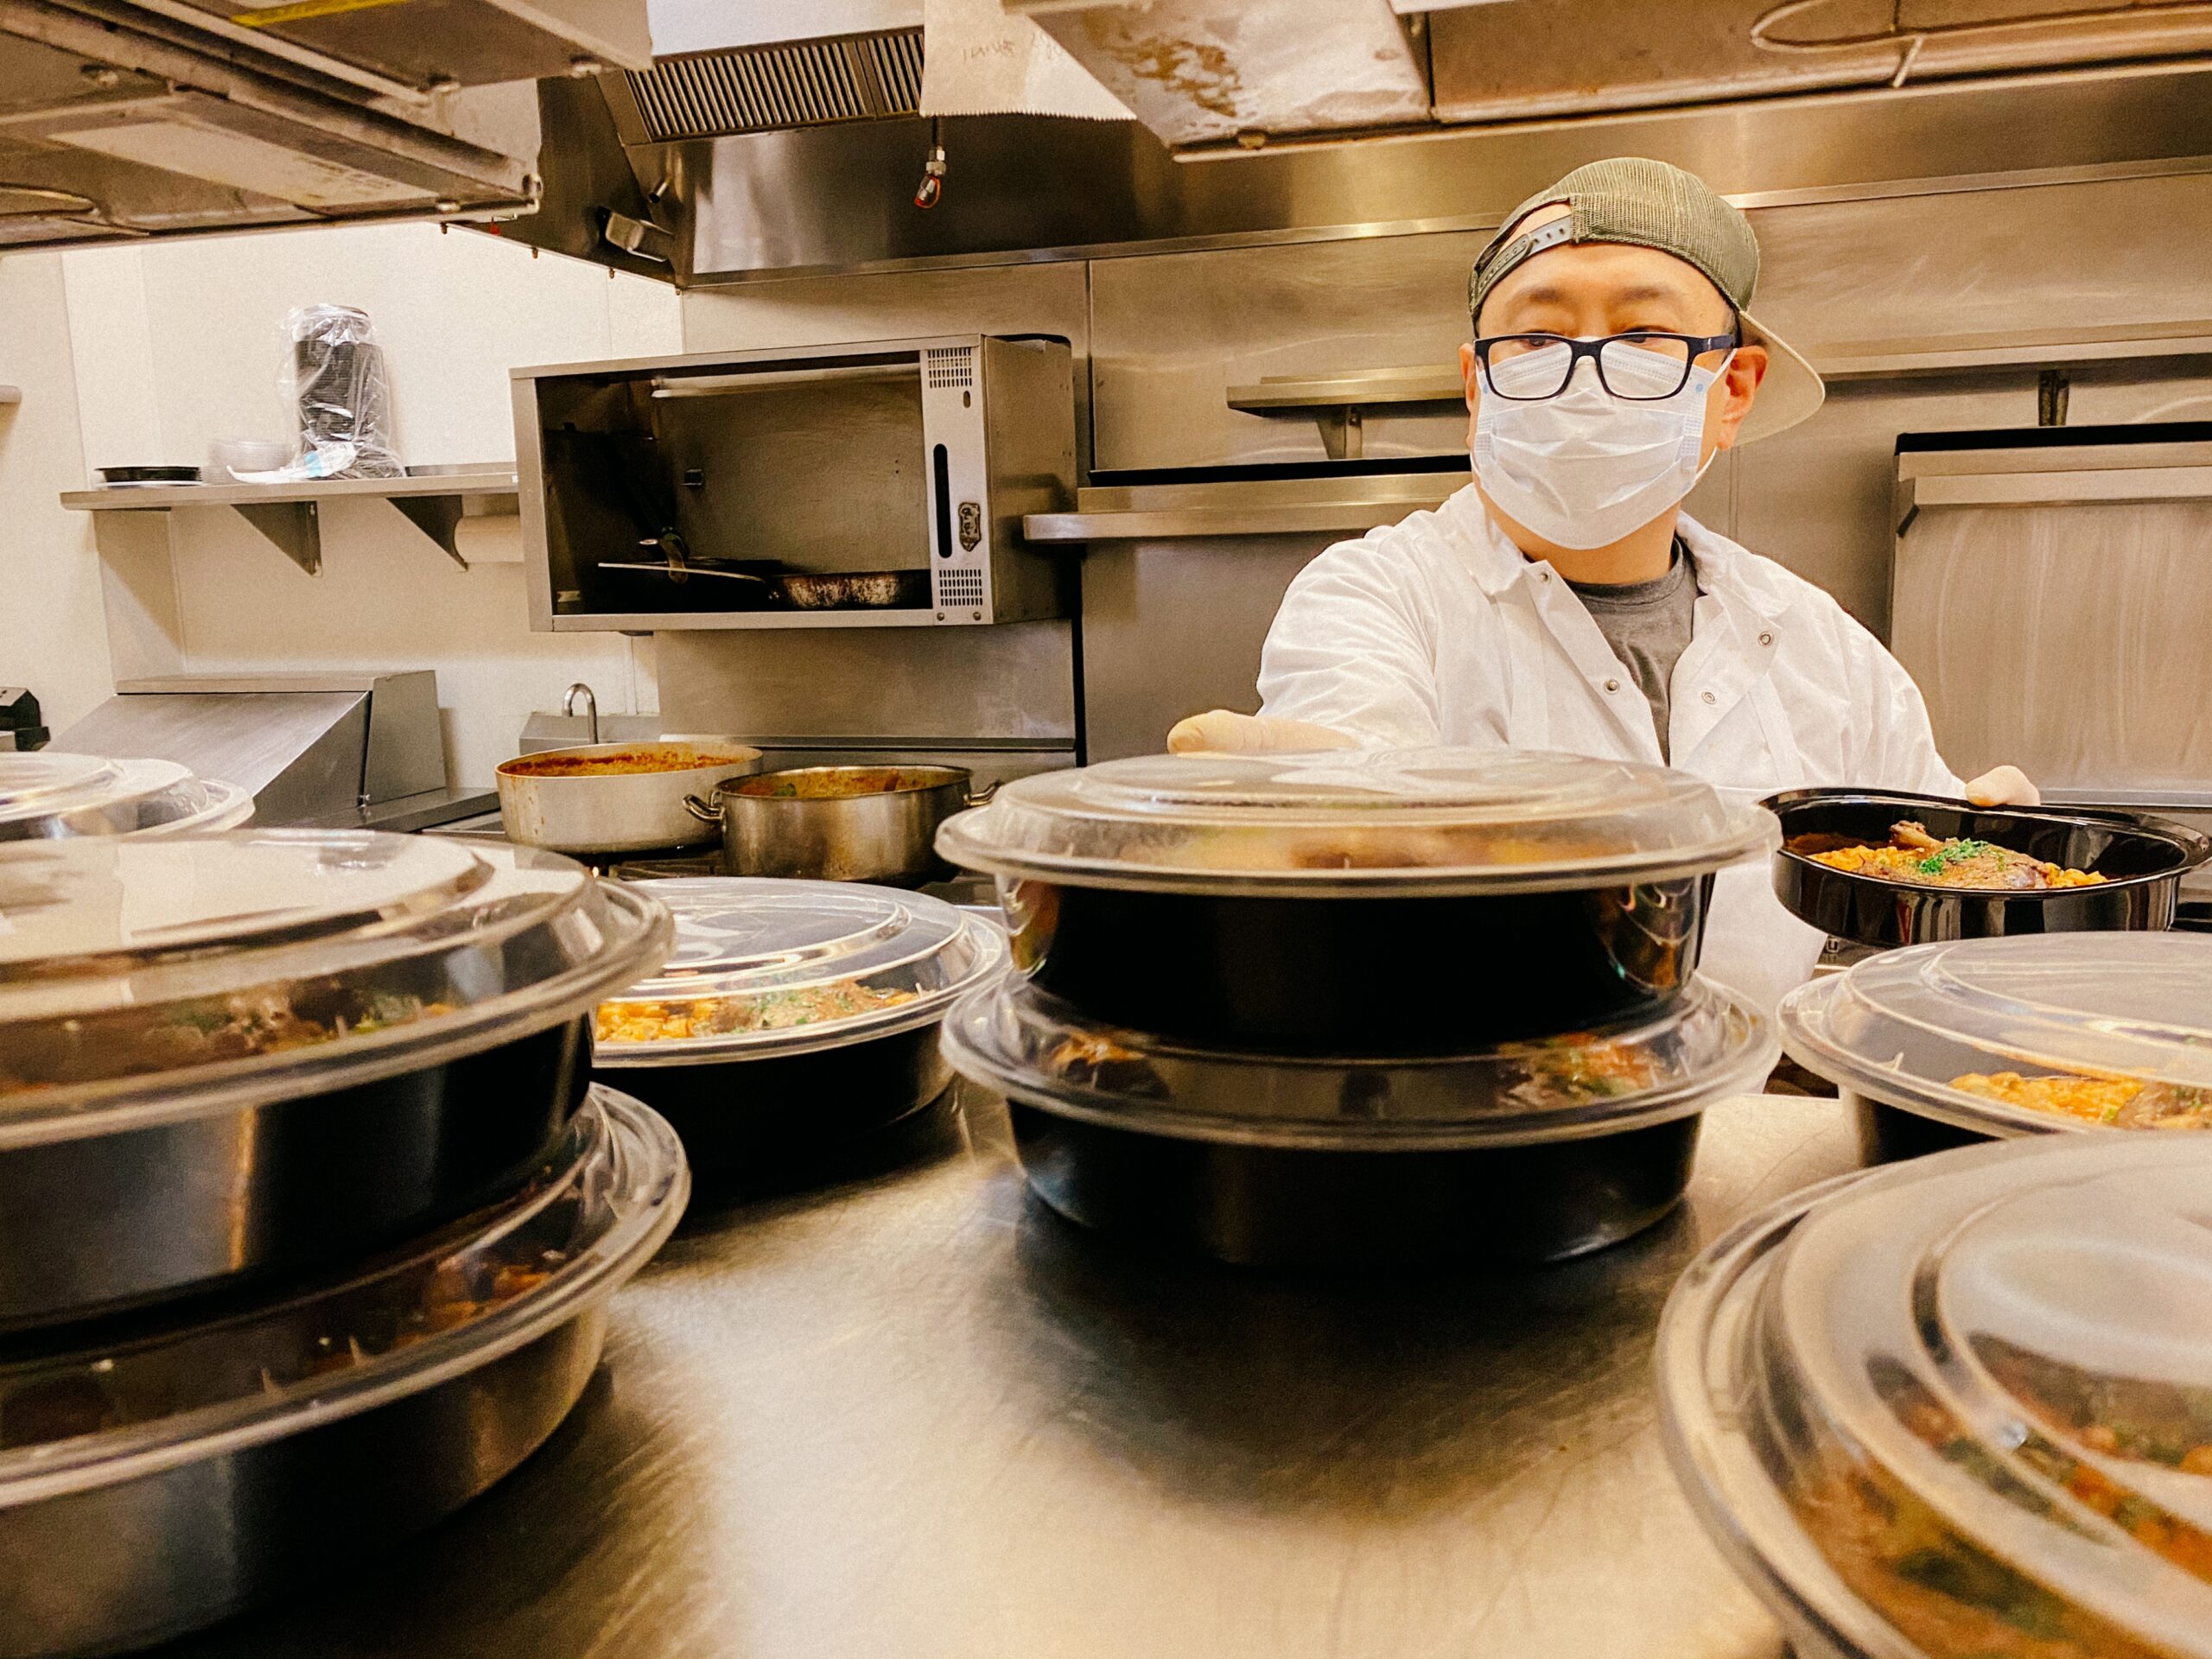 A chef preparing takeout orders during the pandemic